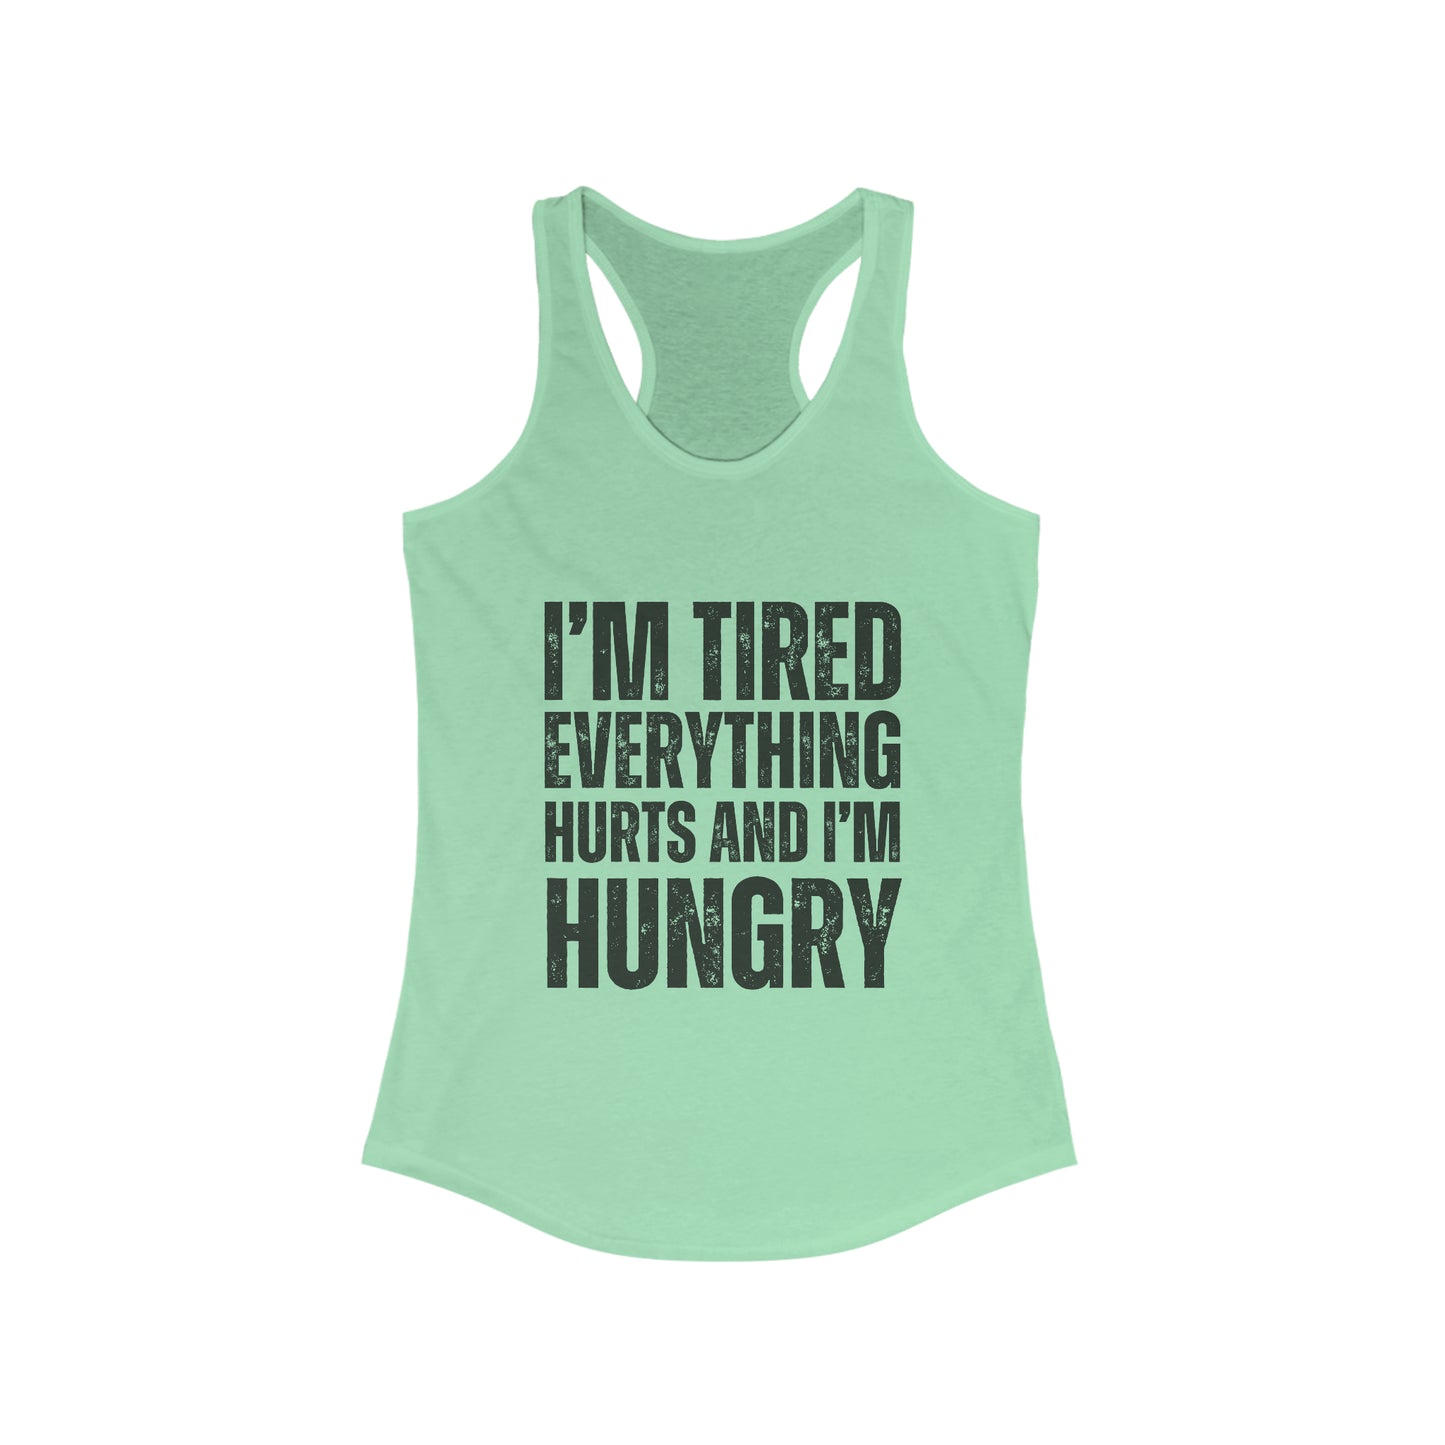 I'm Tired and everything hurts women's tank top